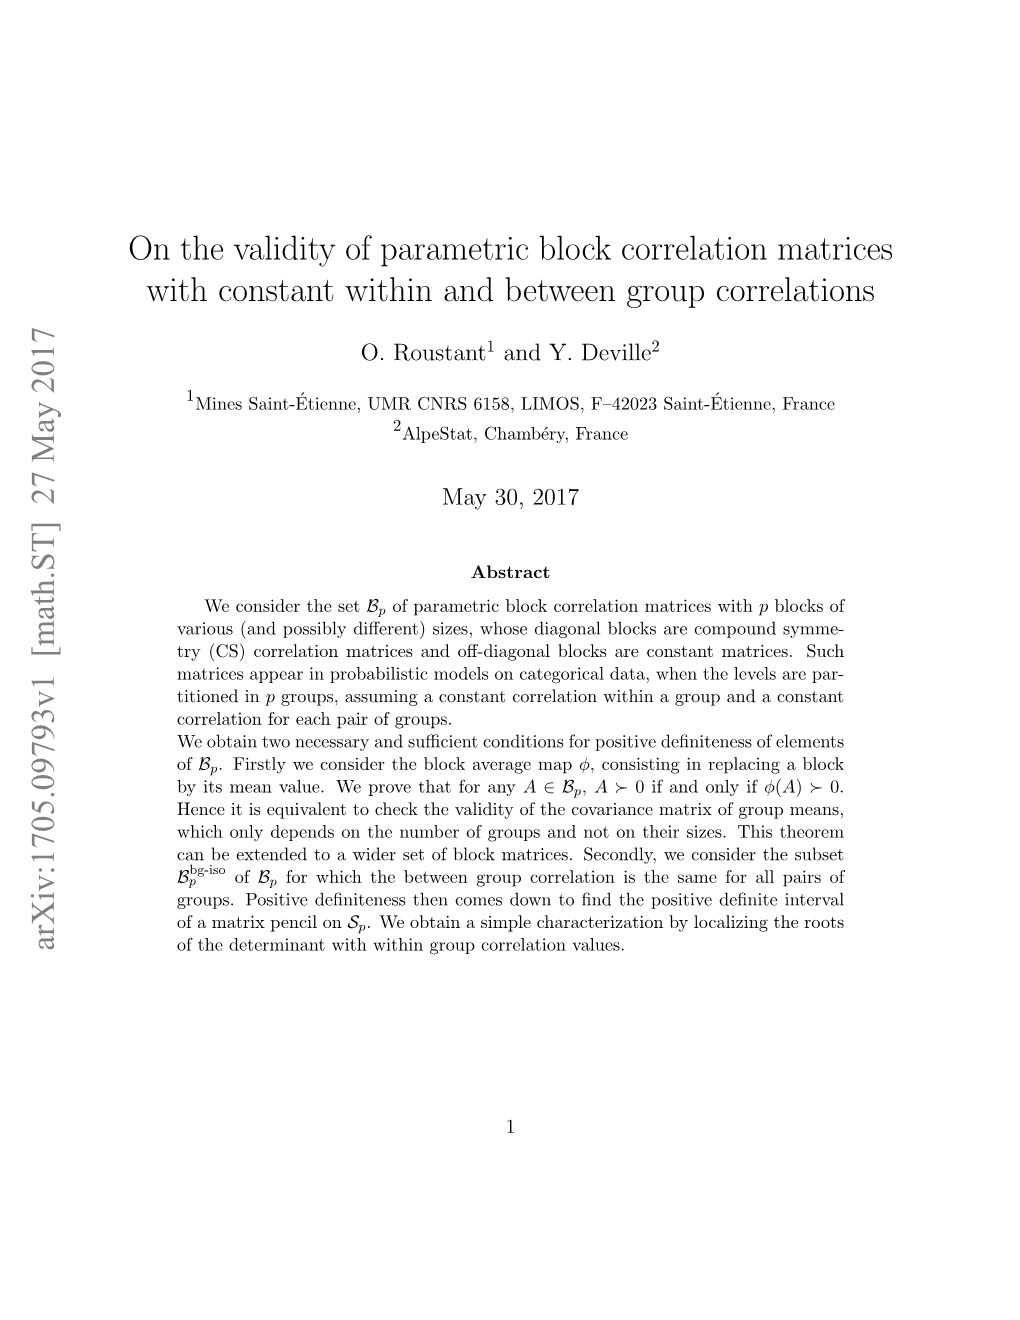 On the Validity of Parametric Block Correlation Matrices with Constant Within and Between Group Correlations